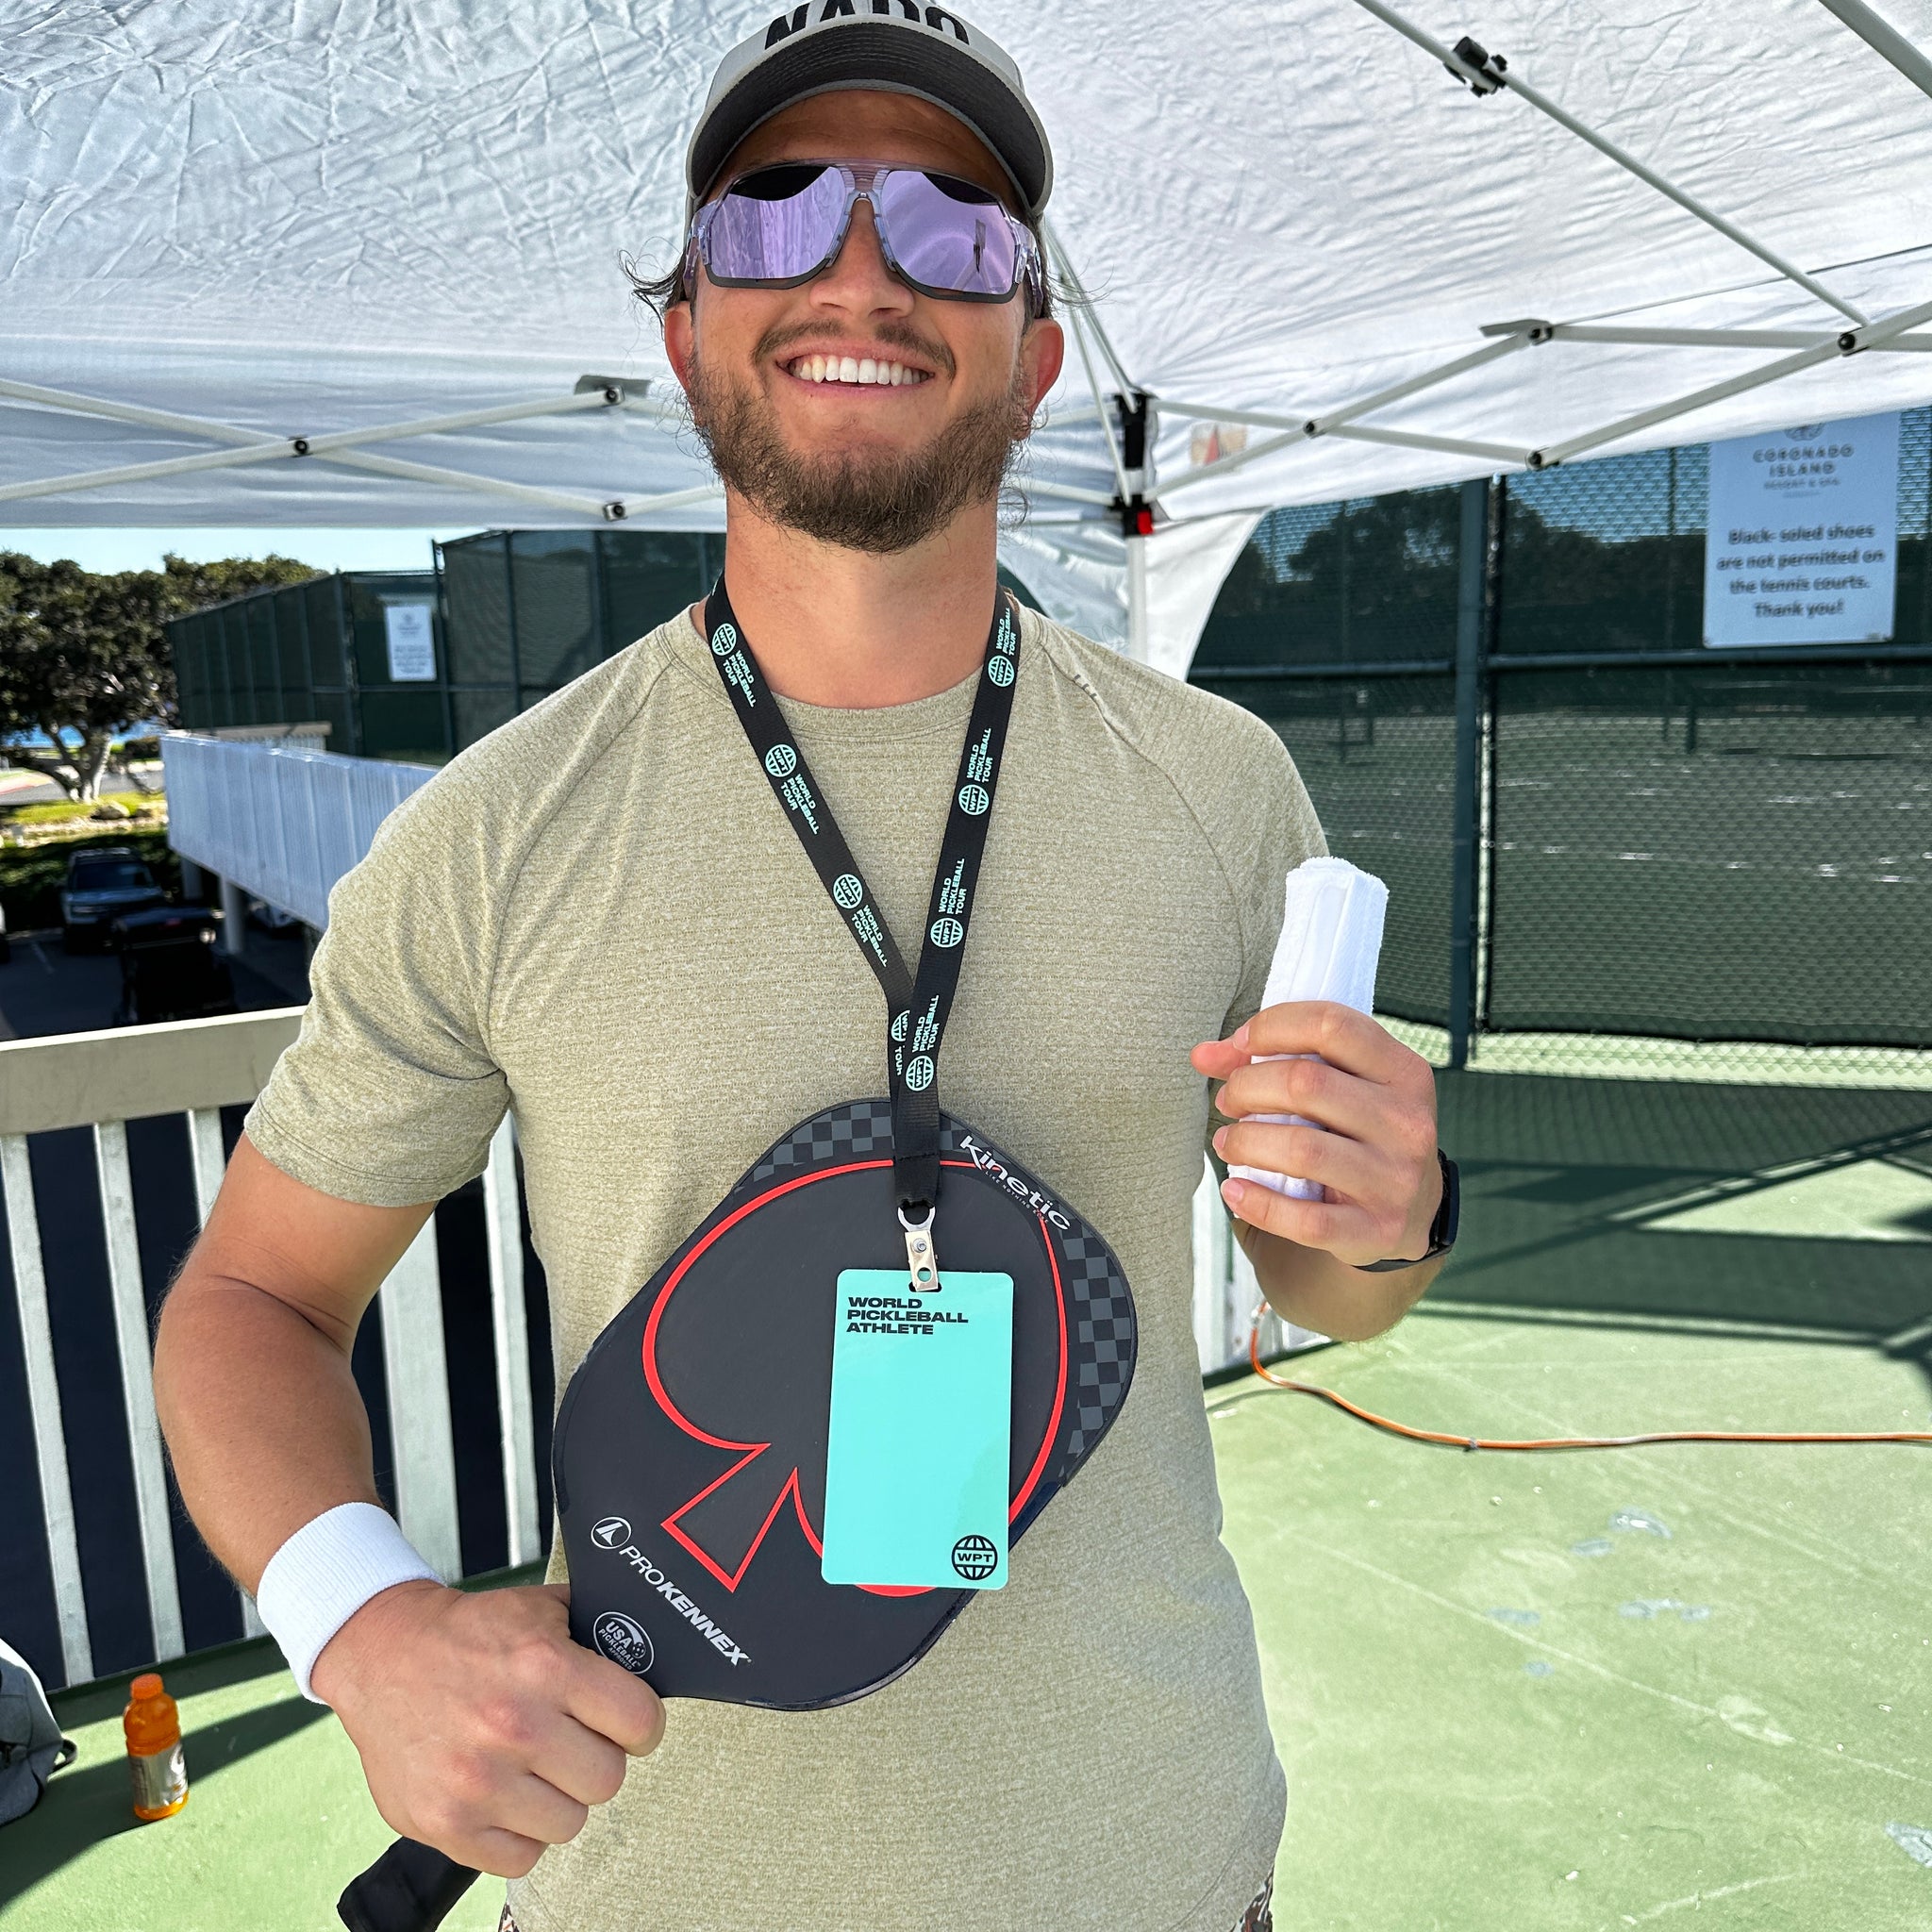 Champions Unveiled: Highlights from the World Pickleball Tour in San Diego